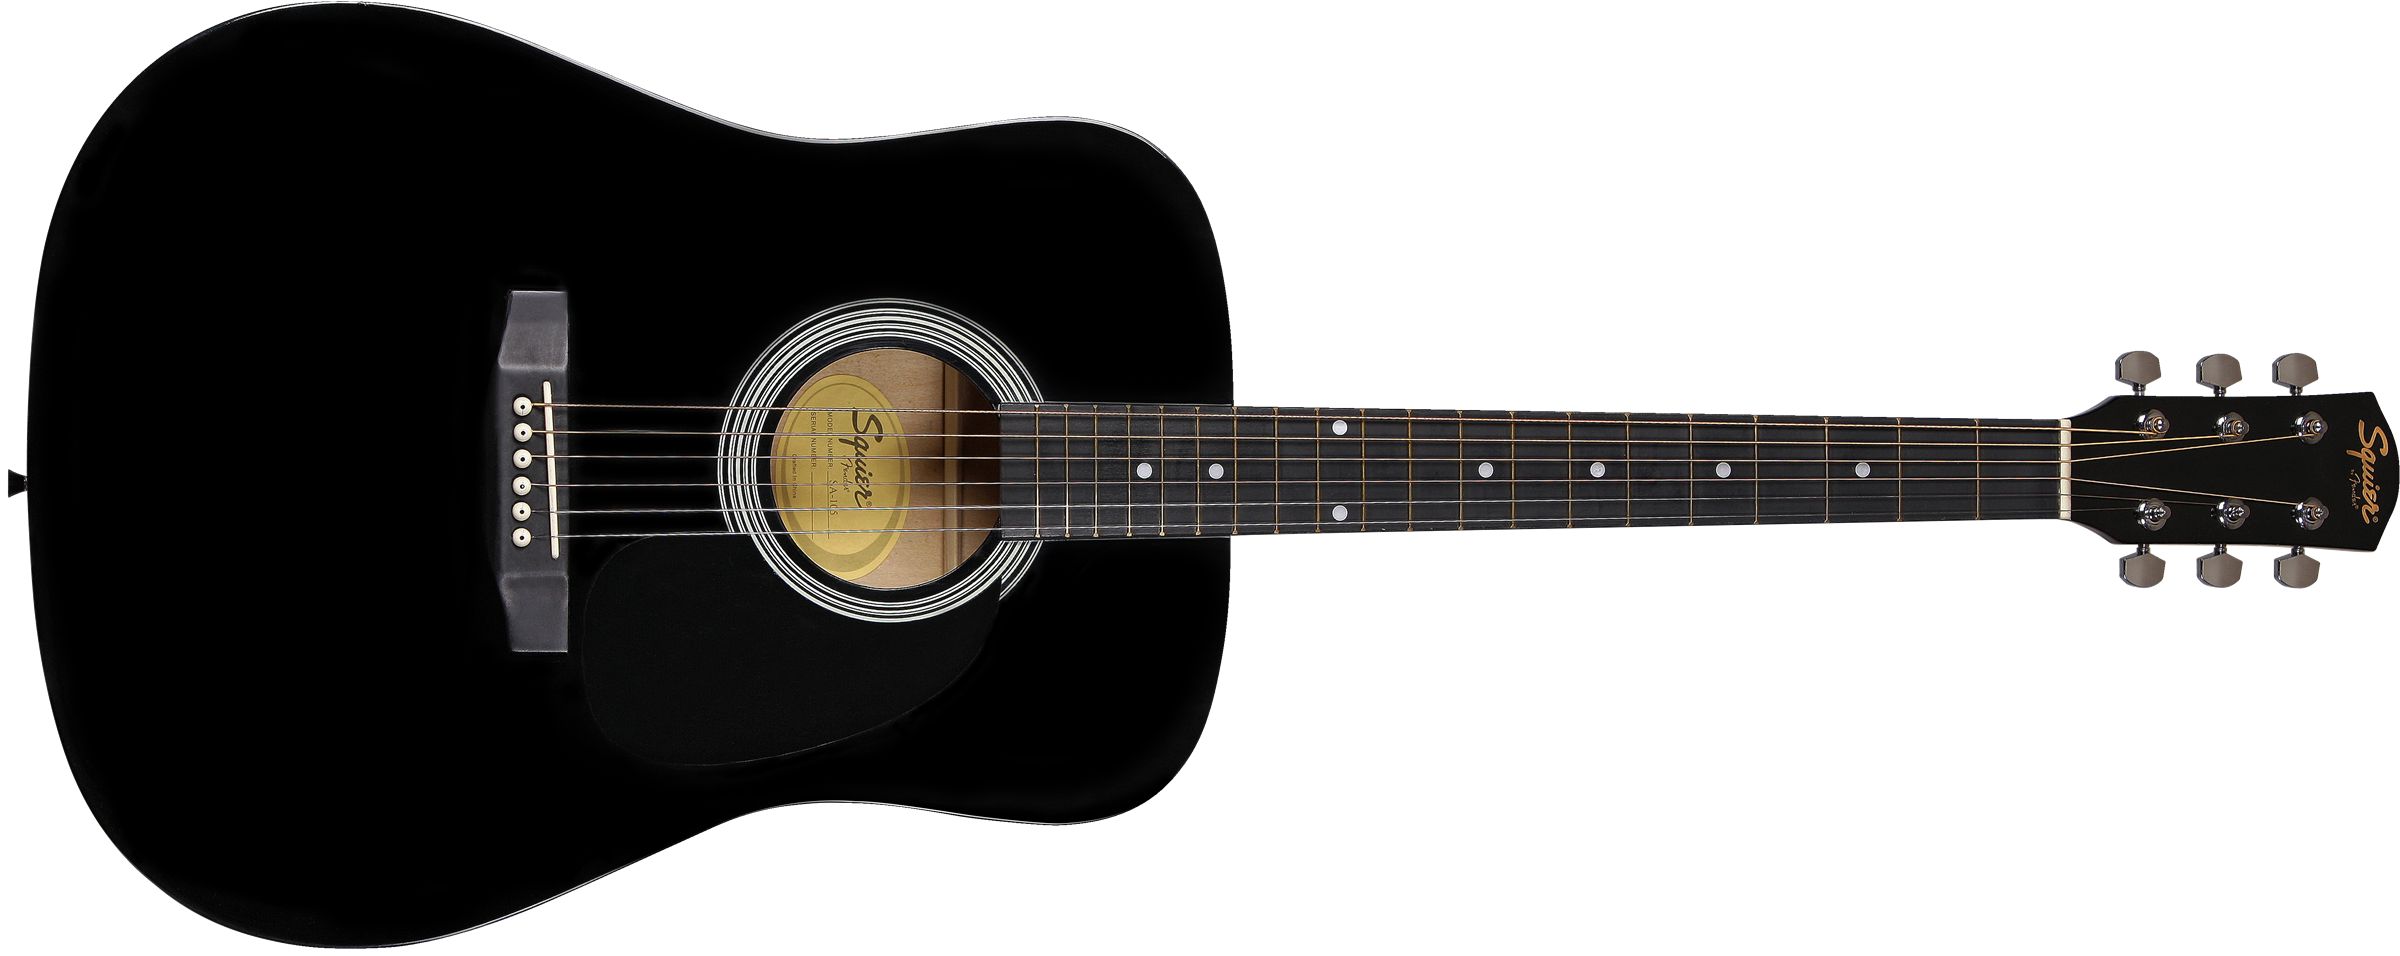 Squier Dreadnought, Dark-Stained Maple Fingerboard, SA-105, Black